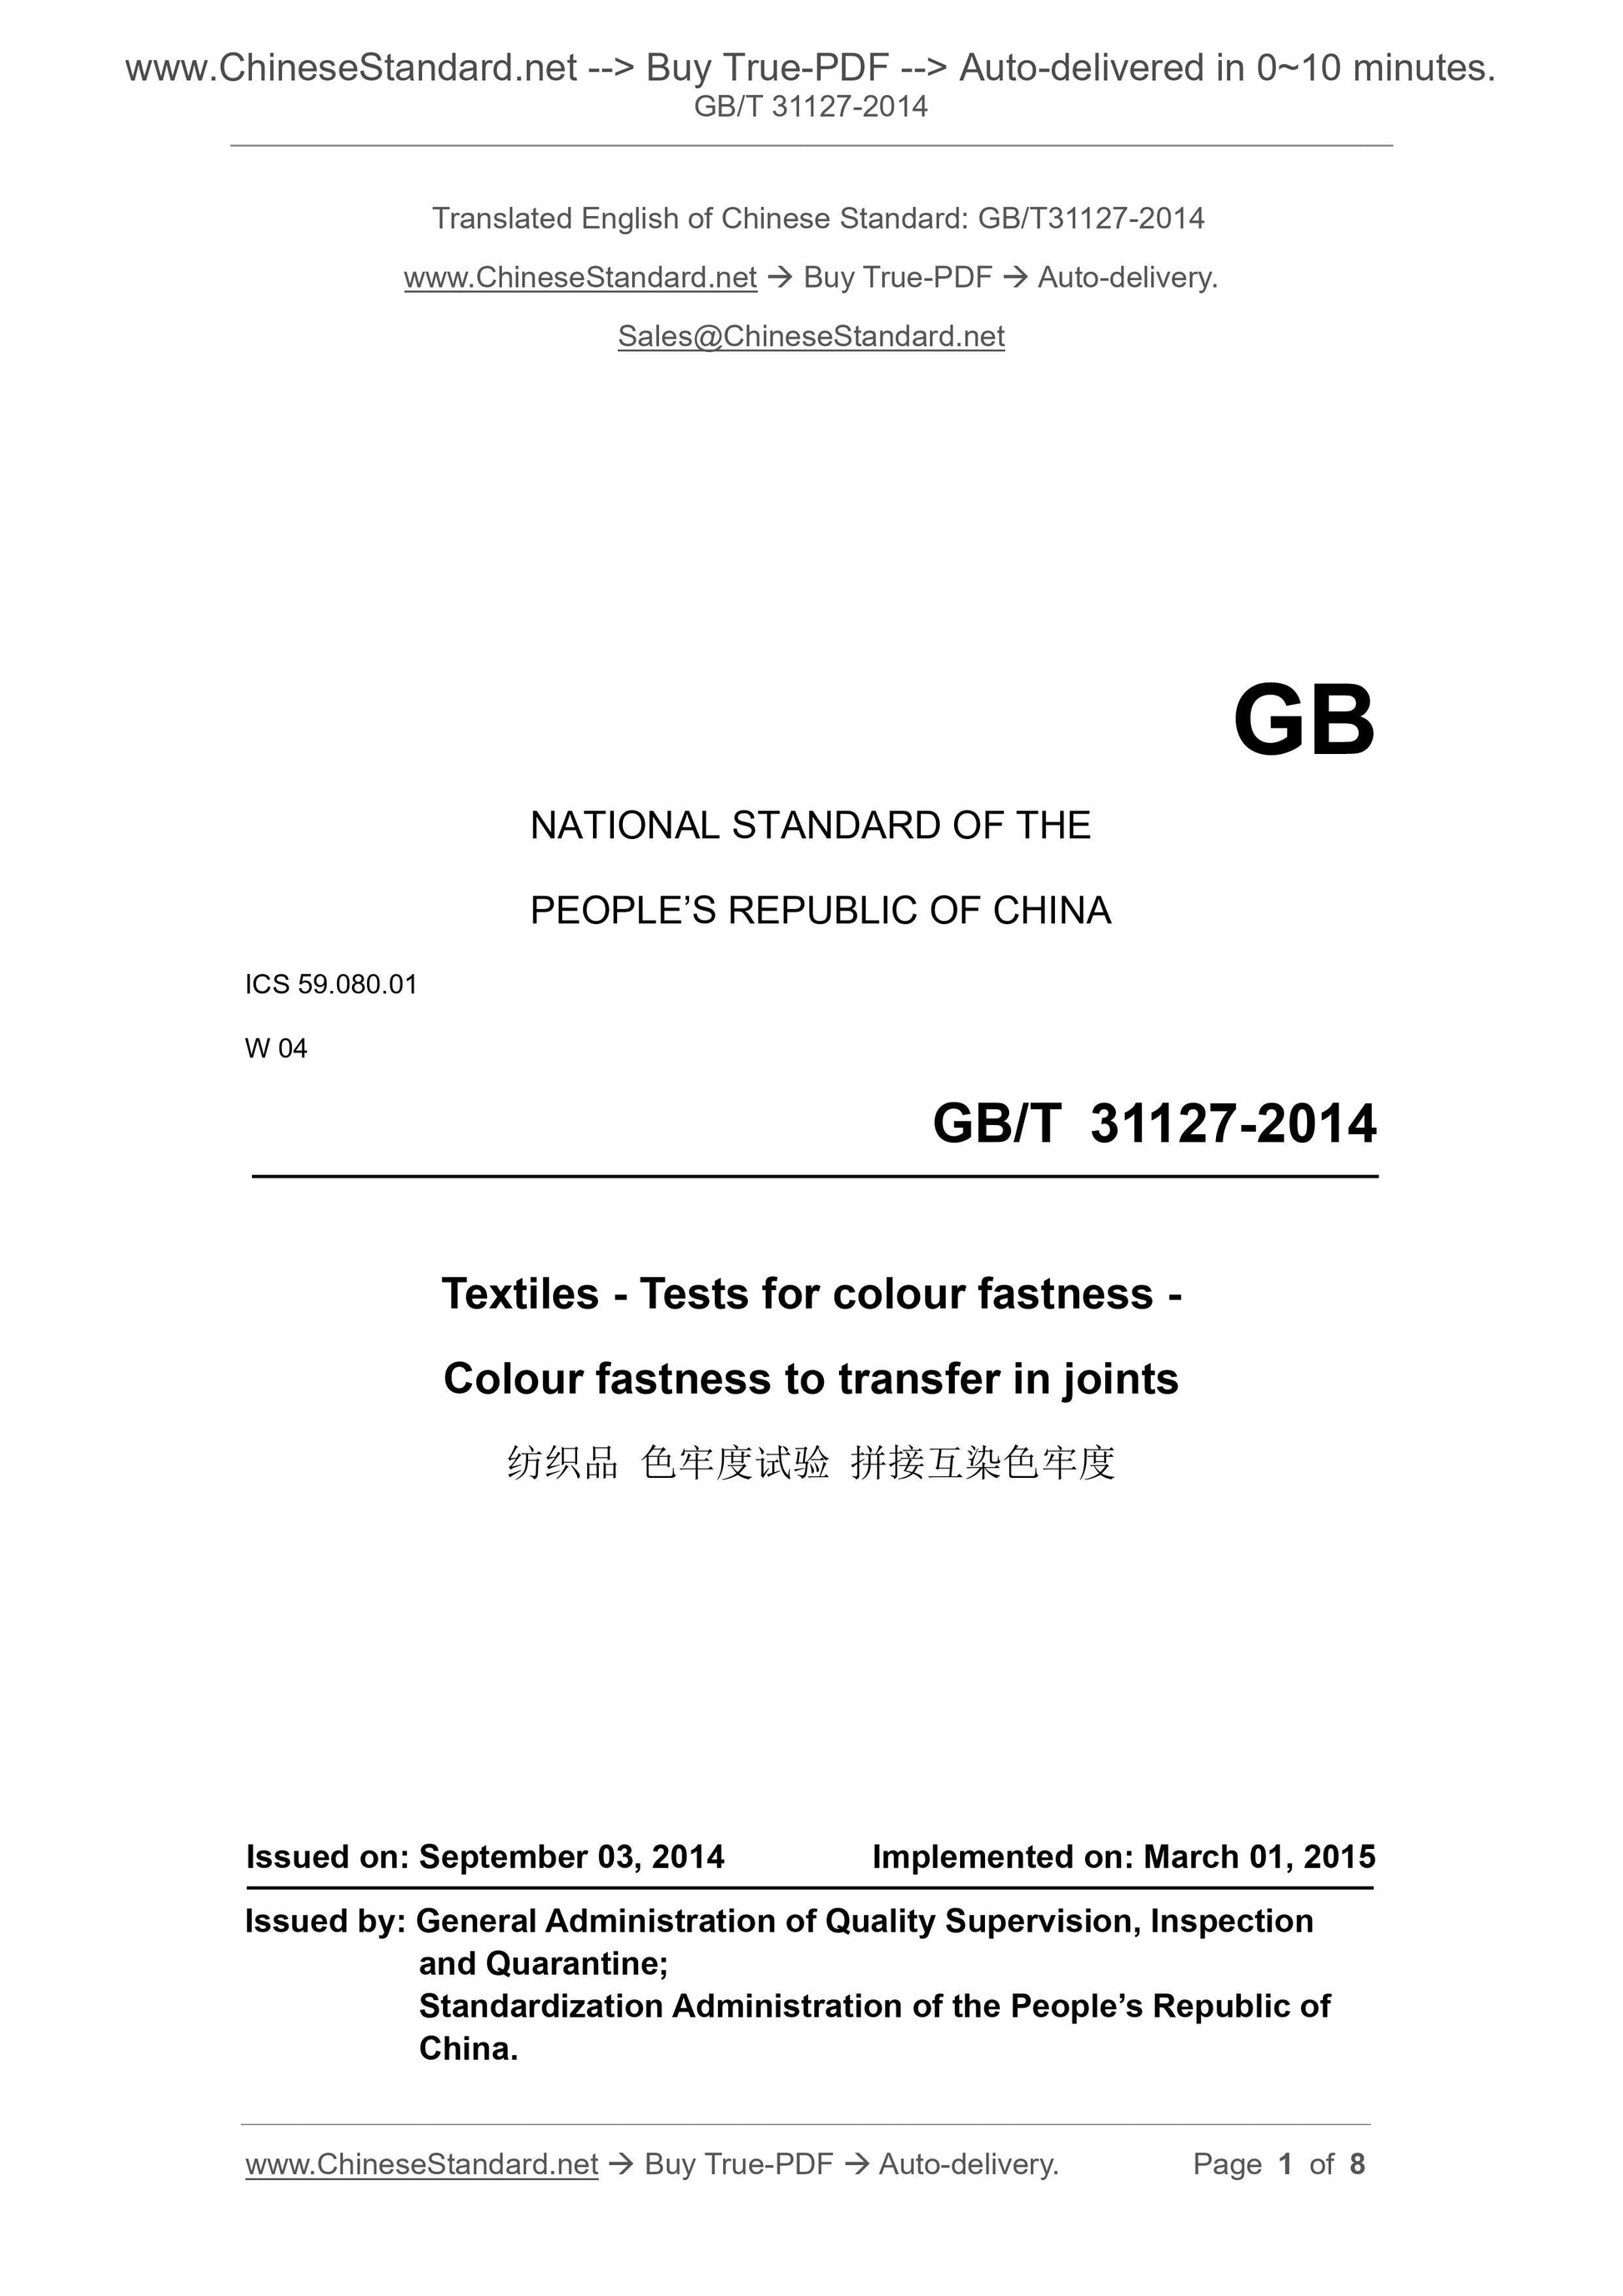 GB/T 31127-2014 Page 1